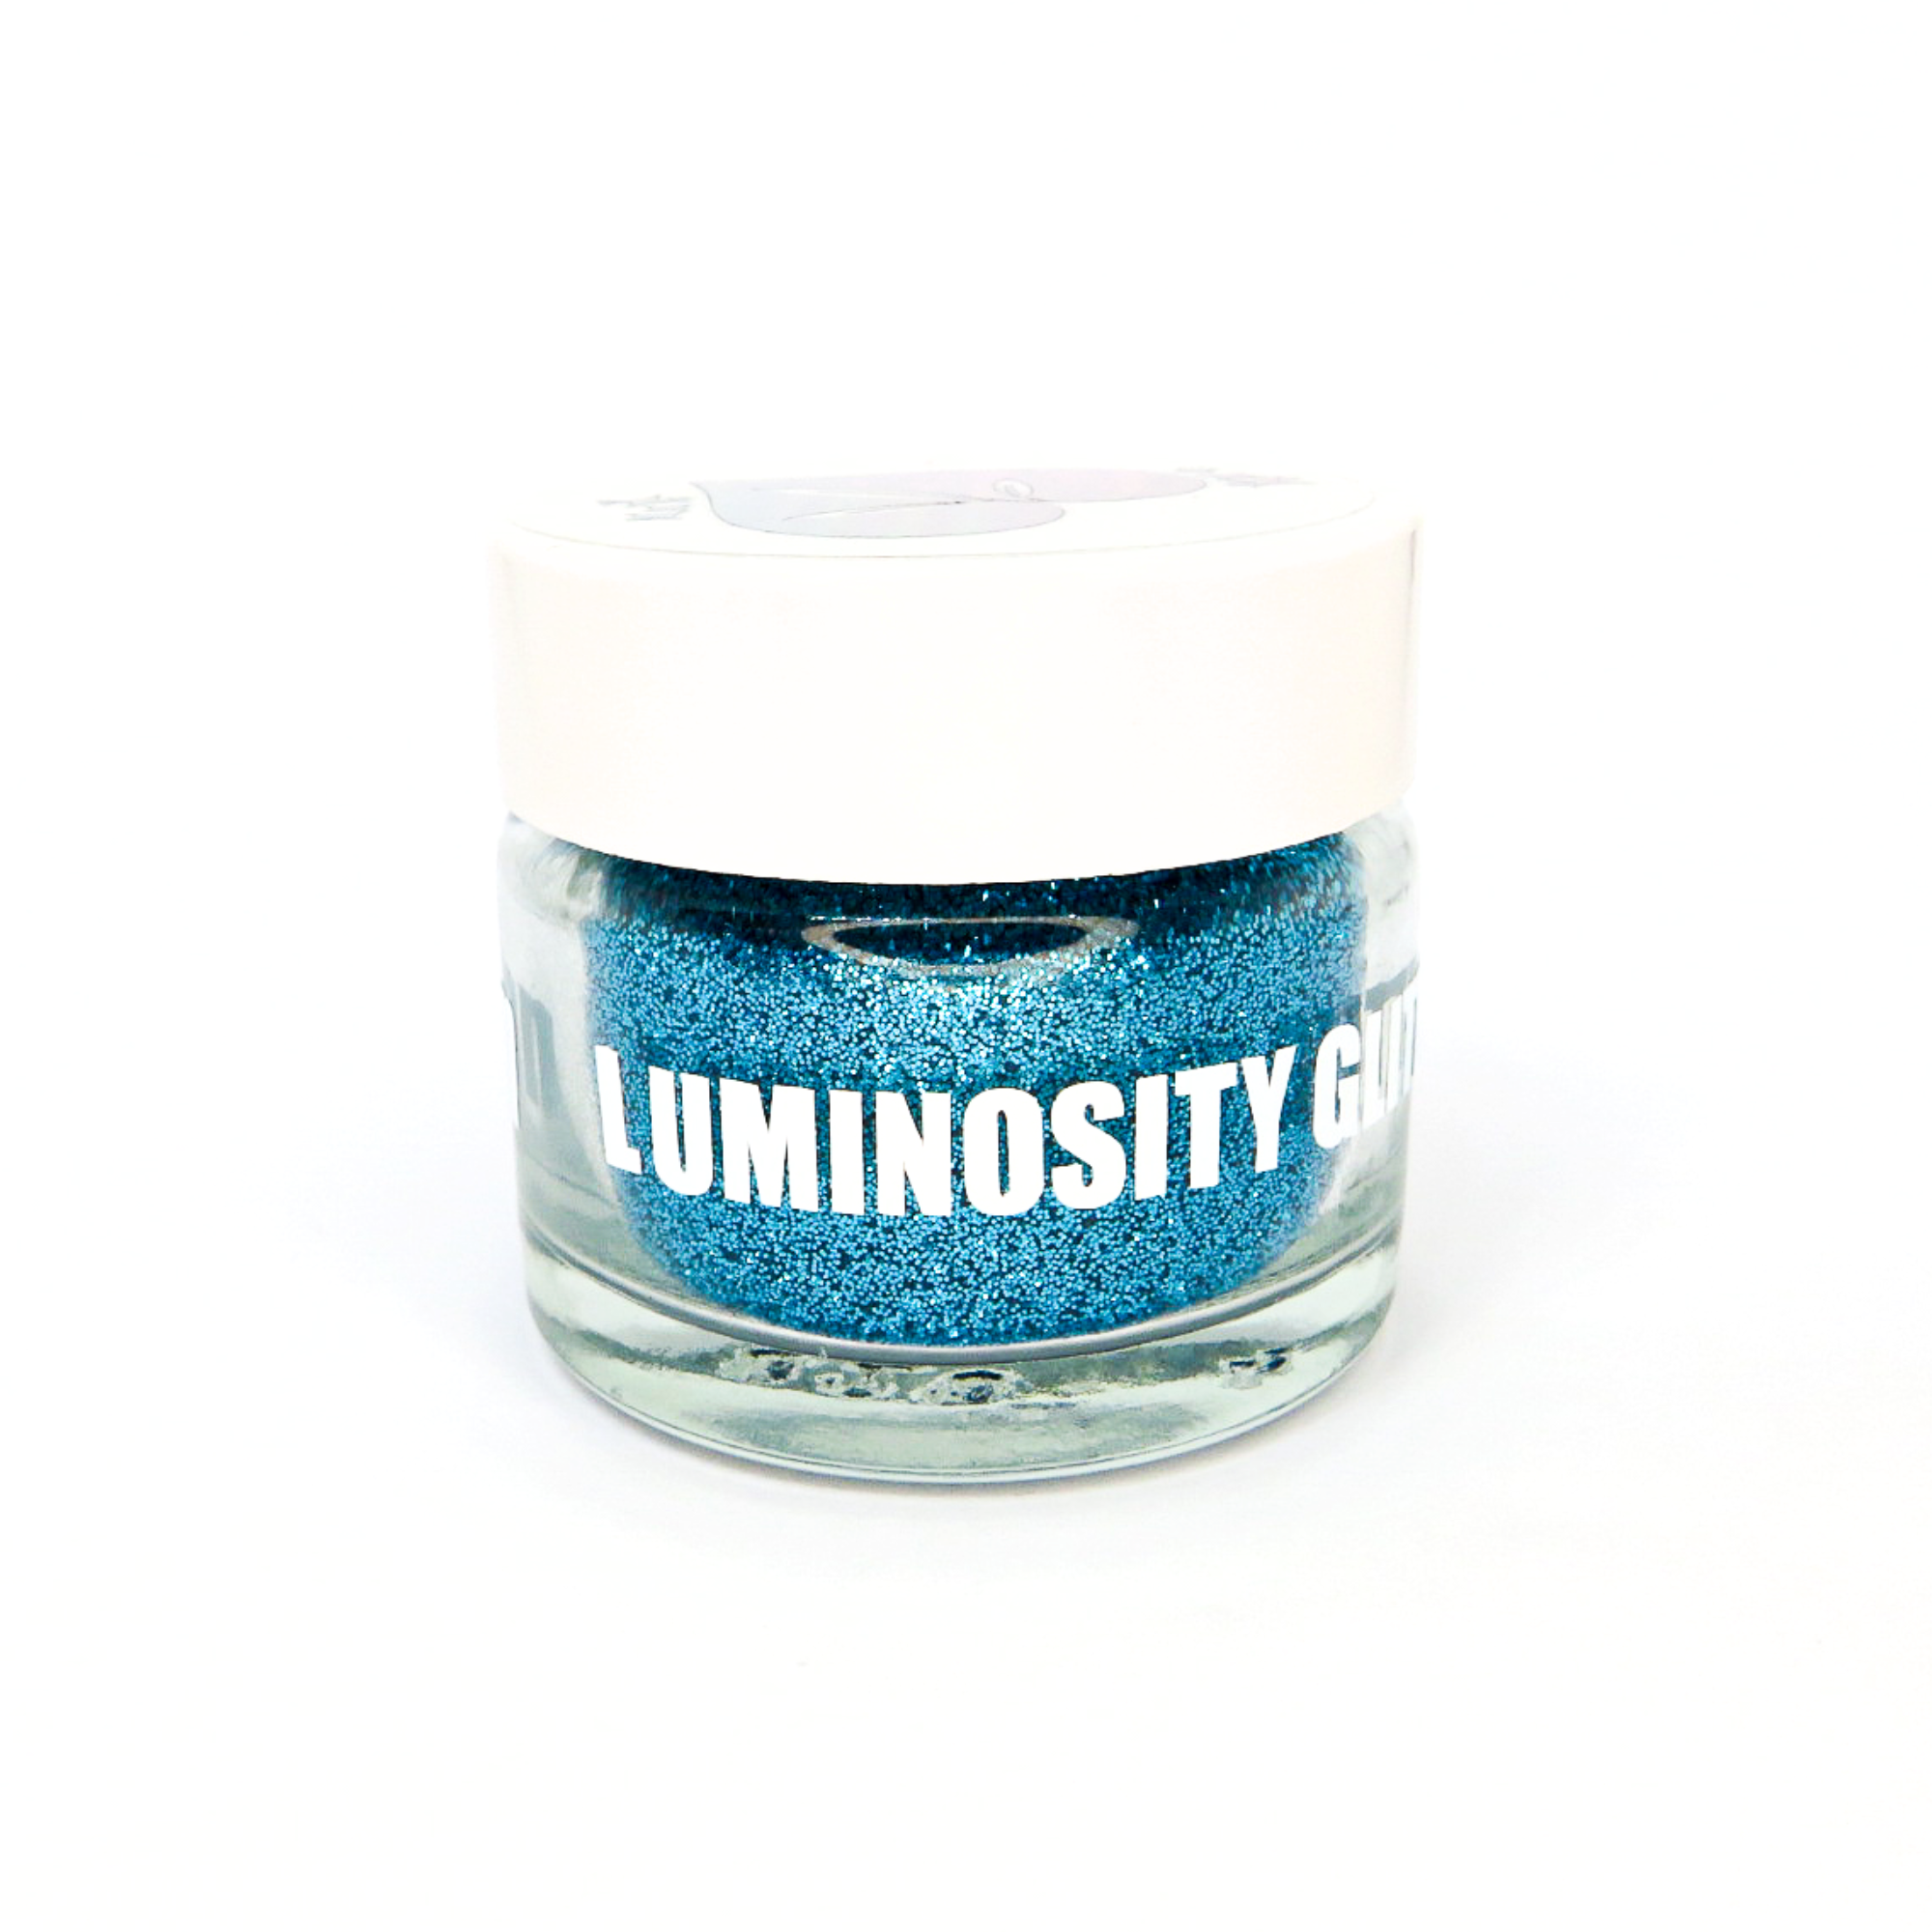 Blue eco stardust bioglitter from the pro collection designed for makeup artists and creatives.